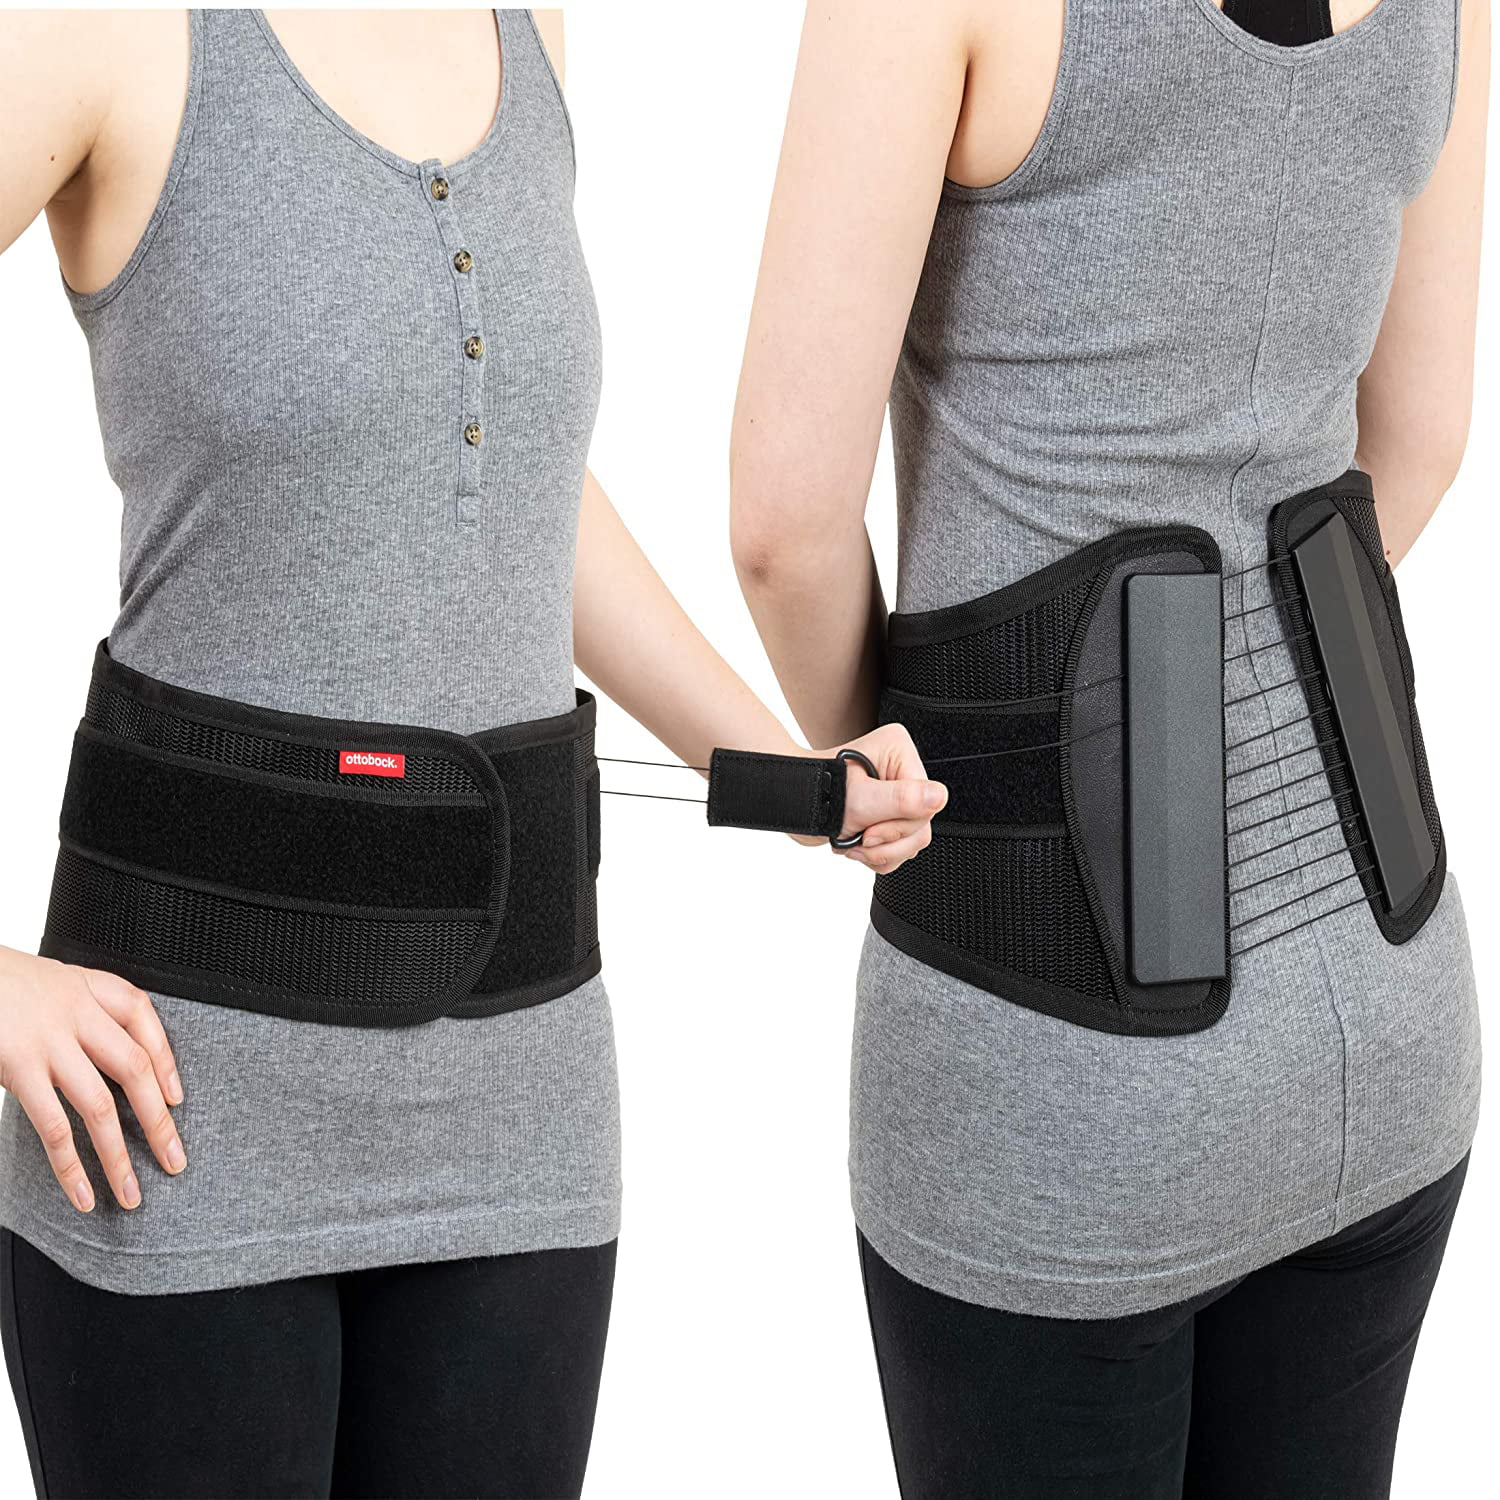 Details about   IronWear 1900 Adjustable Lower Back Support Belt with Suspenders Free Shipping 